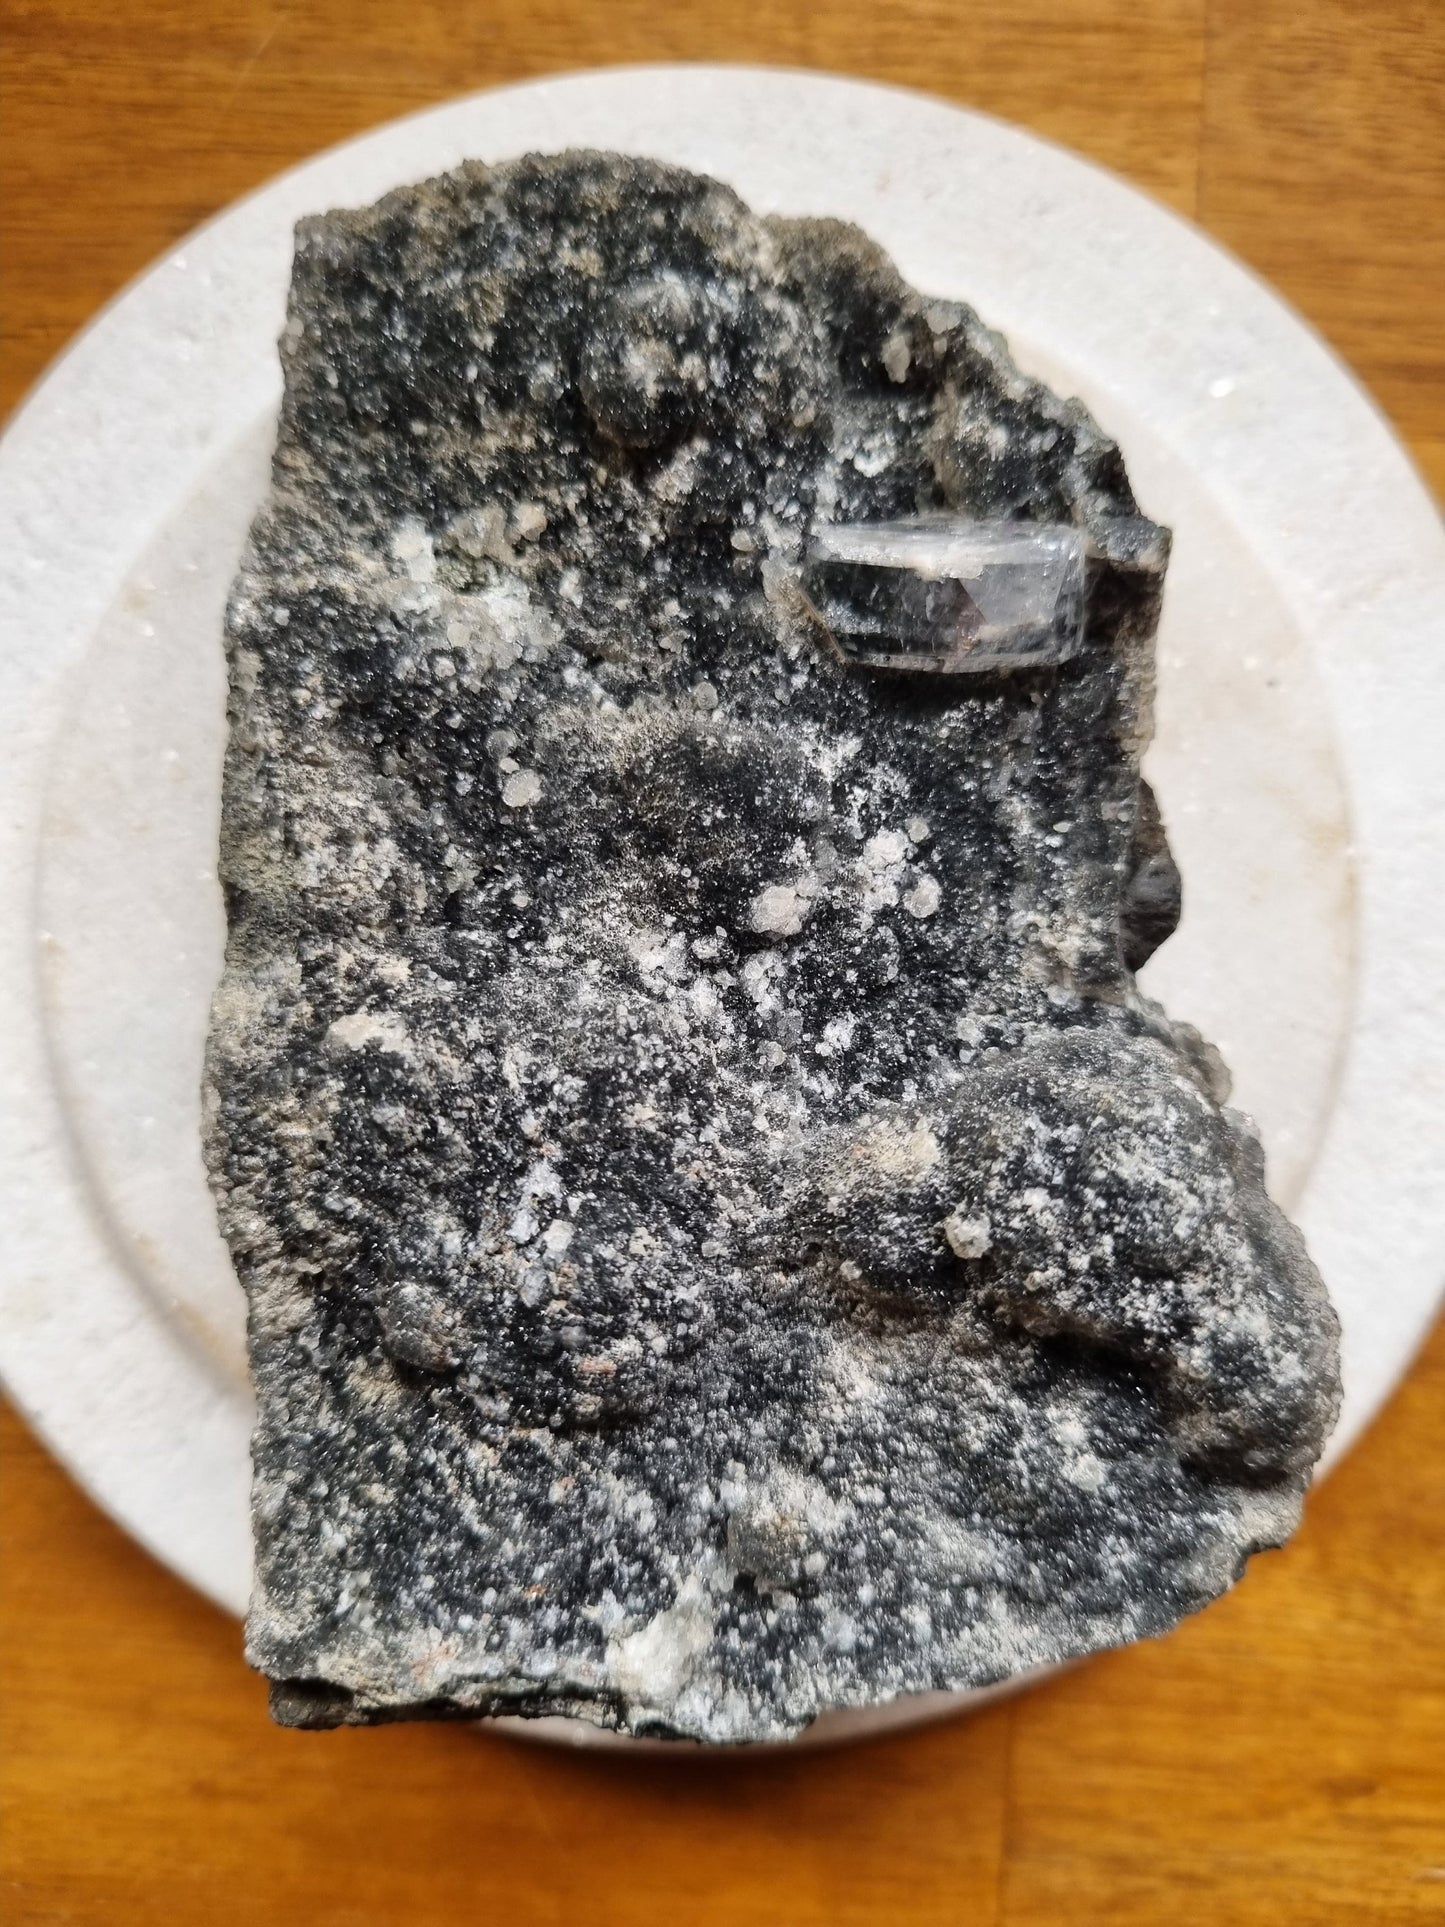 Stunning Black Amethyst With Sparkling Druzy And Apophyllite Inclusion - Universal Fate